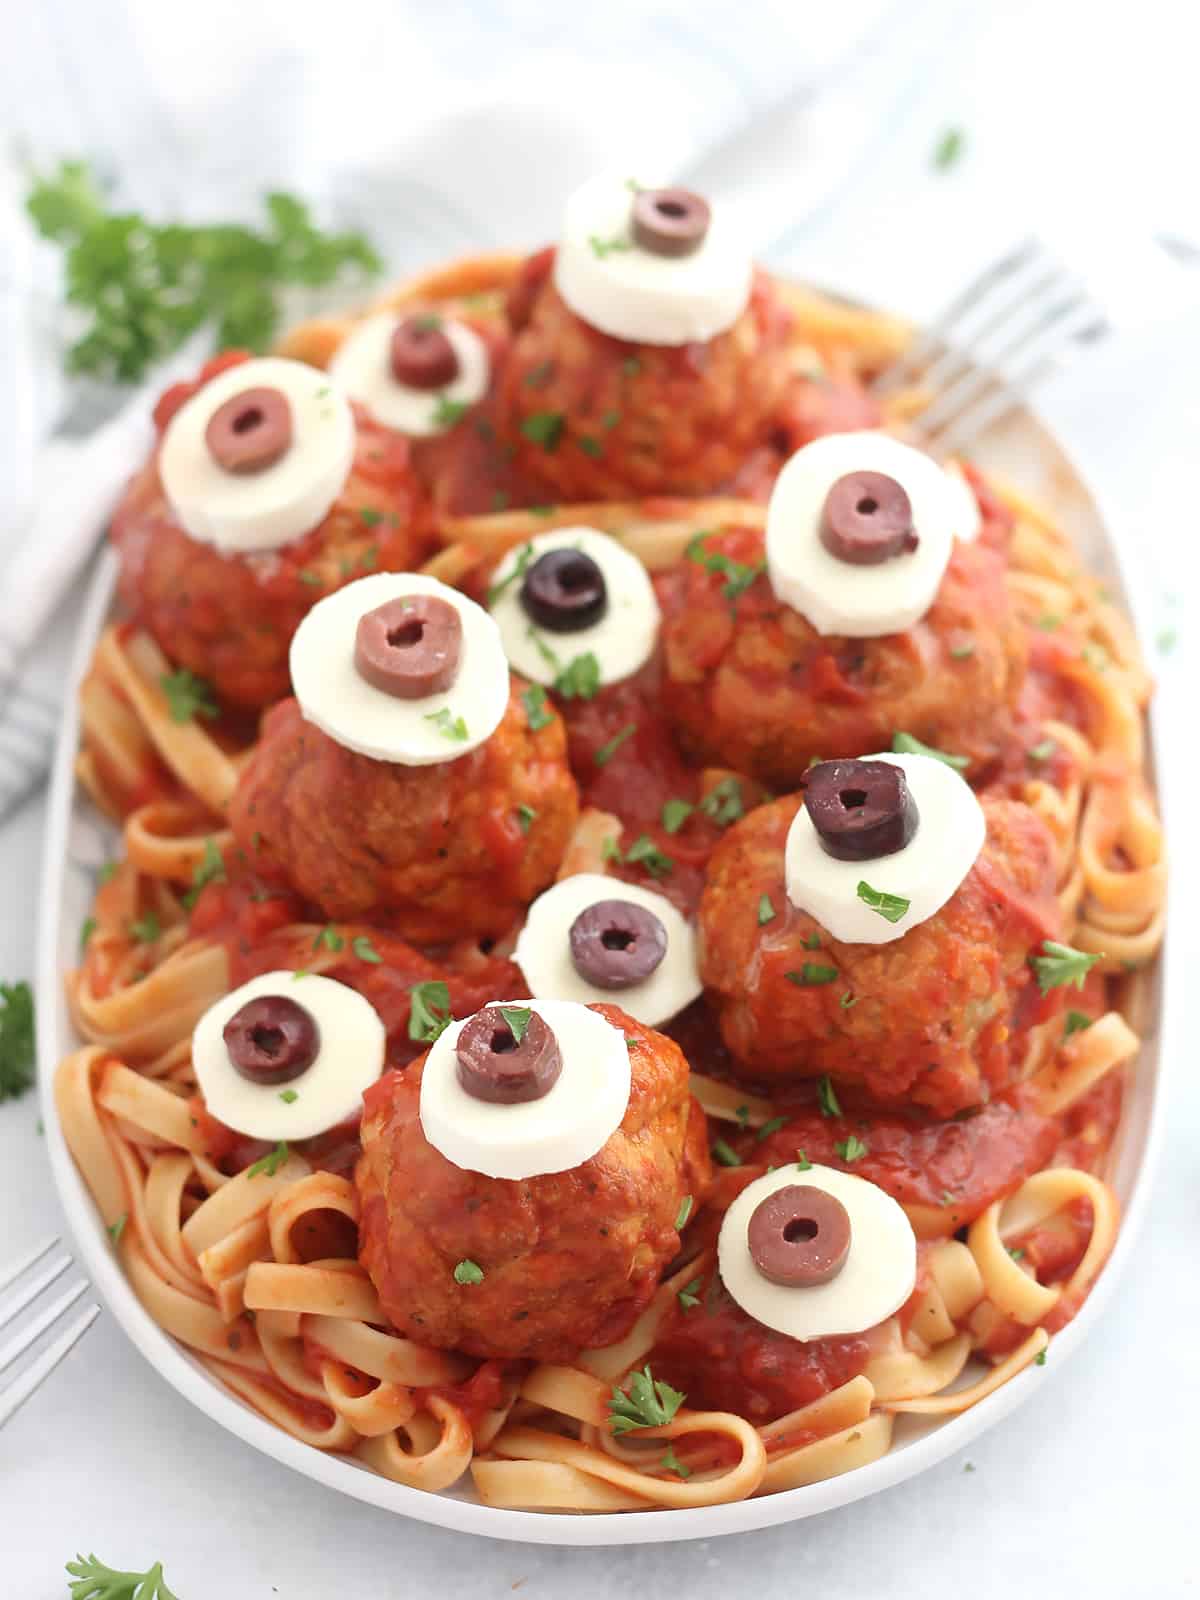 Six eyeball meatballs served on top of pasta and garnished with fresh herbs.